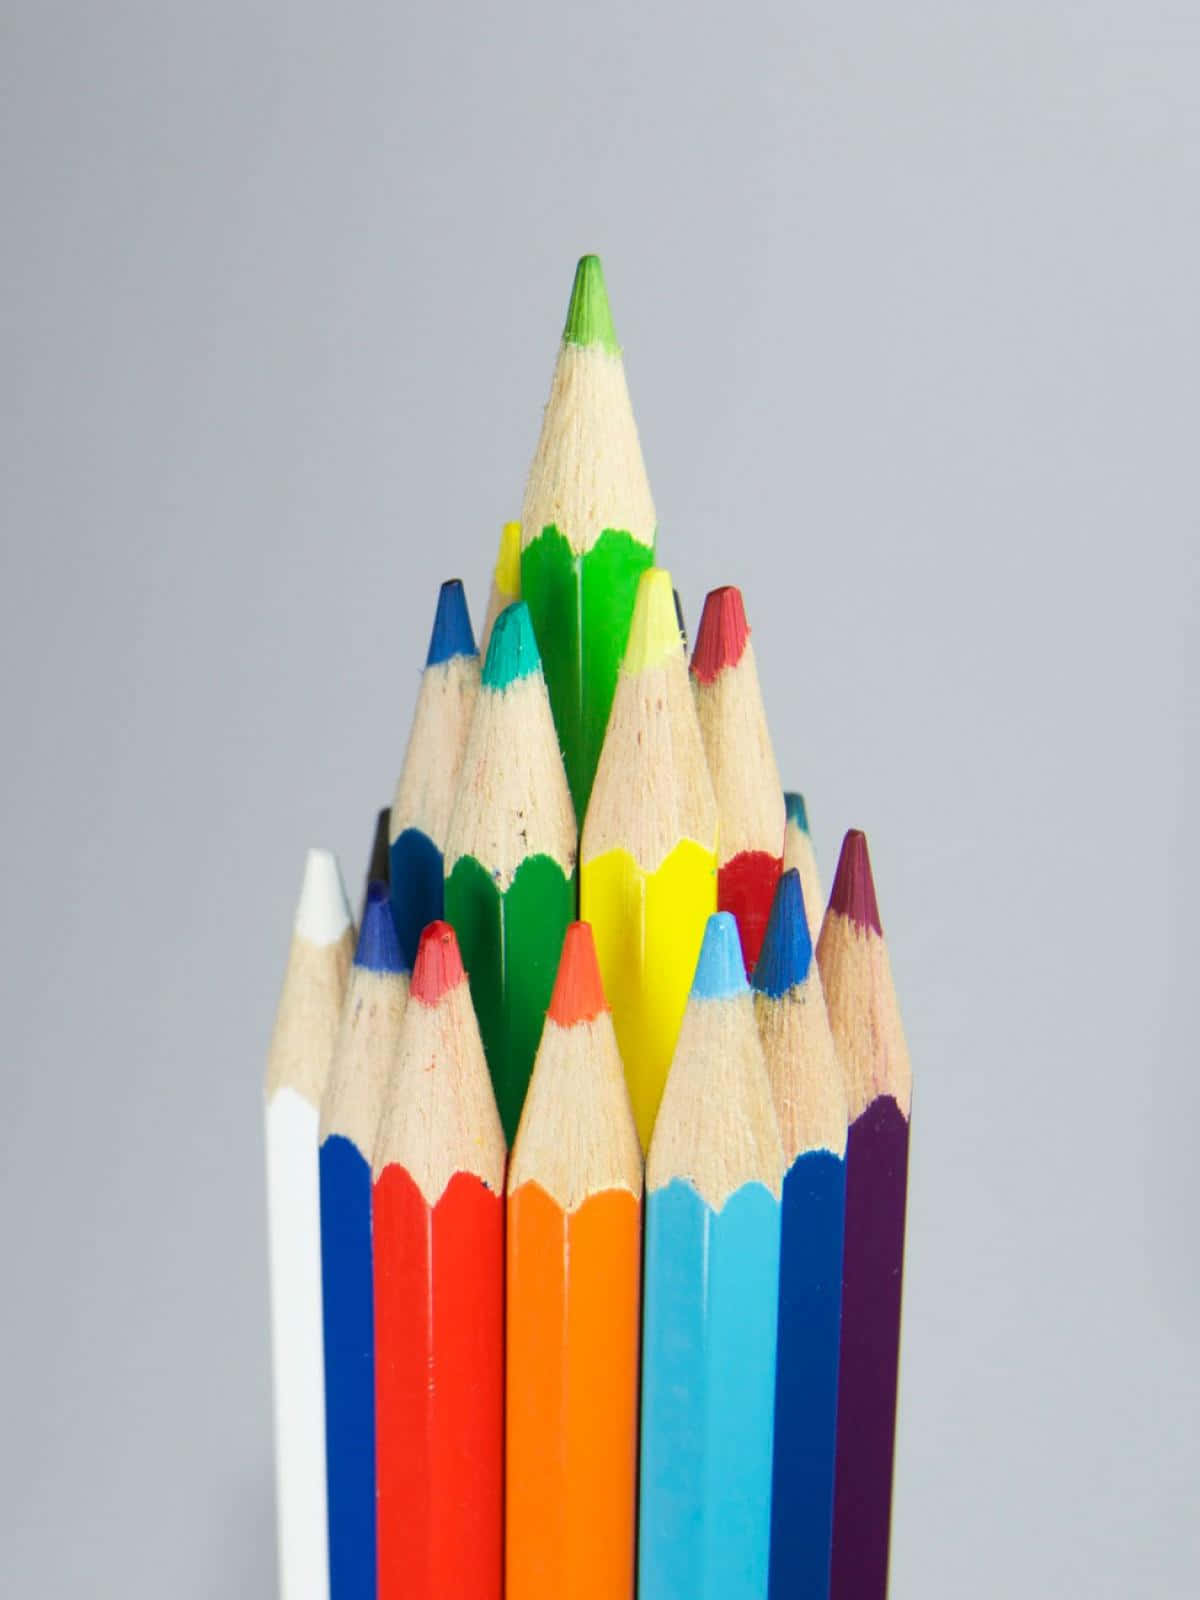 Vibrant Crayons Background